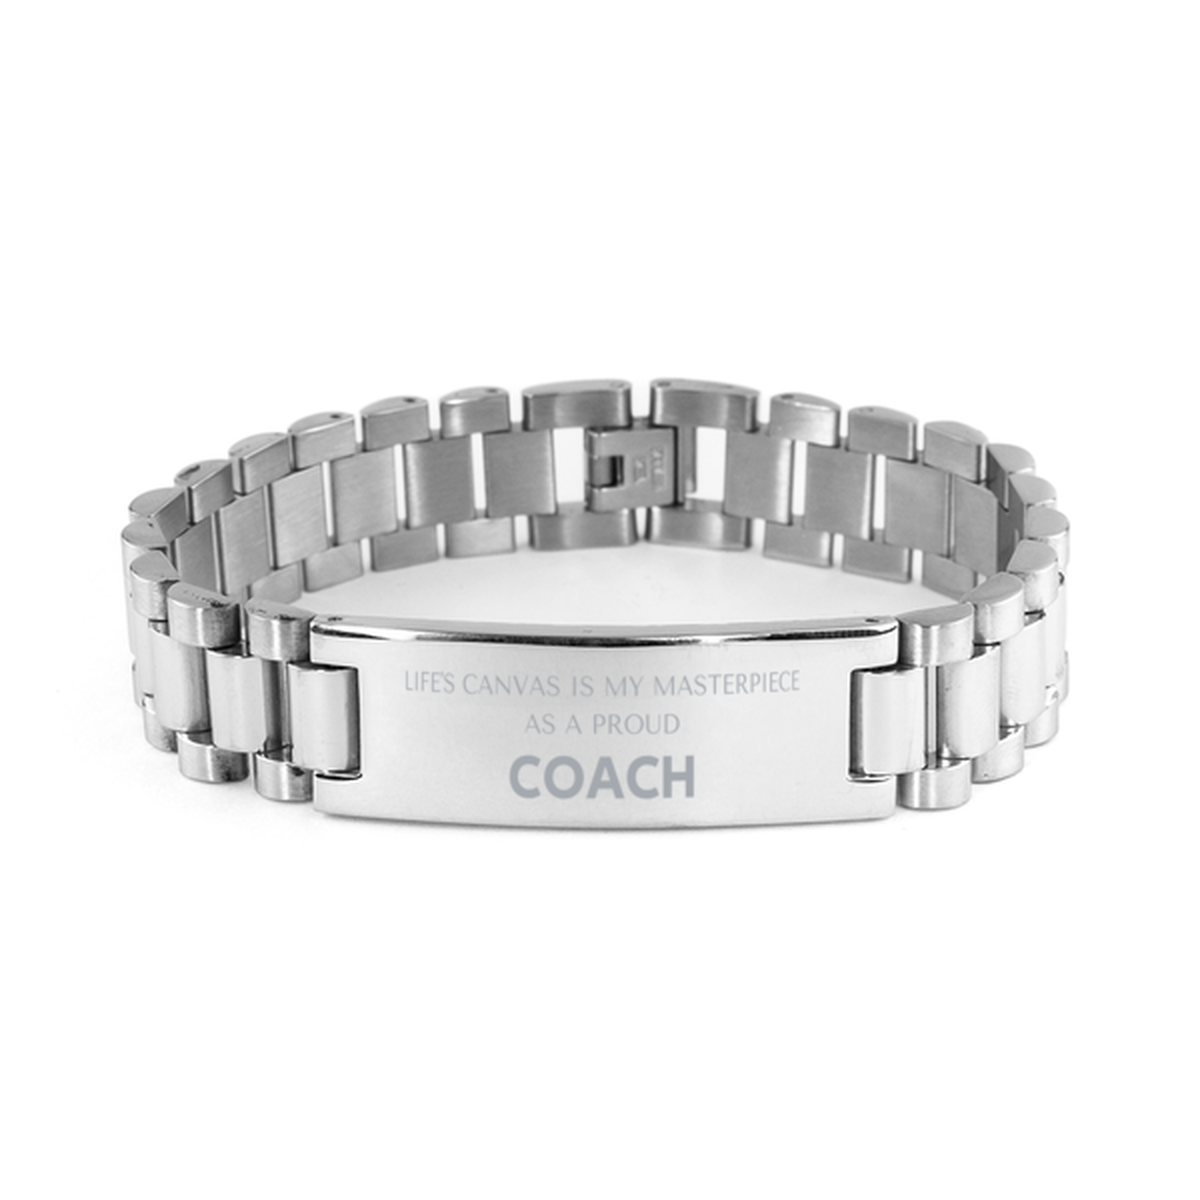 Proud Coach Gifts, Life's canvas is my masterpiece, Epic Birthday Christmas Unique Ladder Stainless Steel Bracelet For Coach, Coworkers, Men, Women, Friends